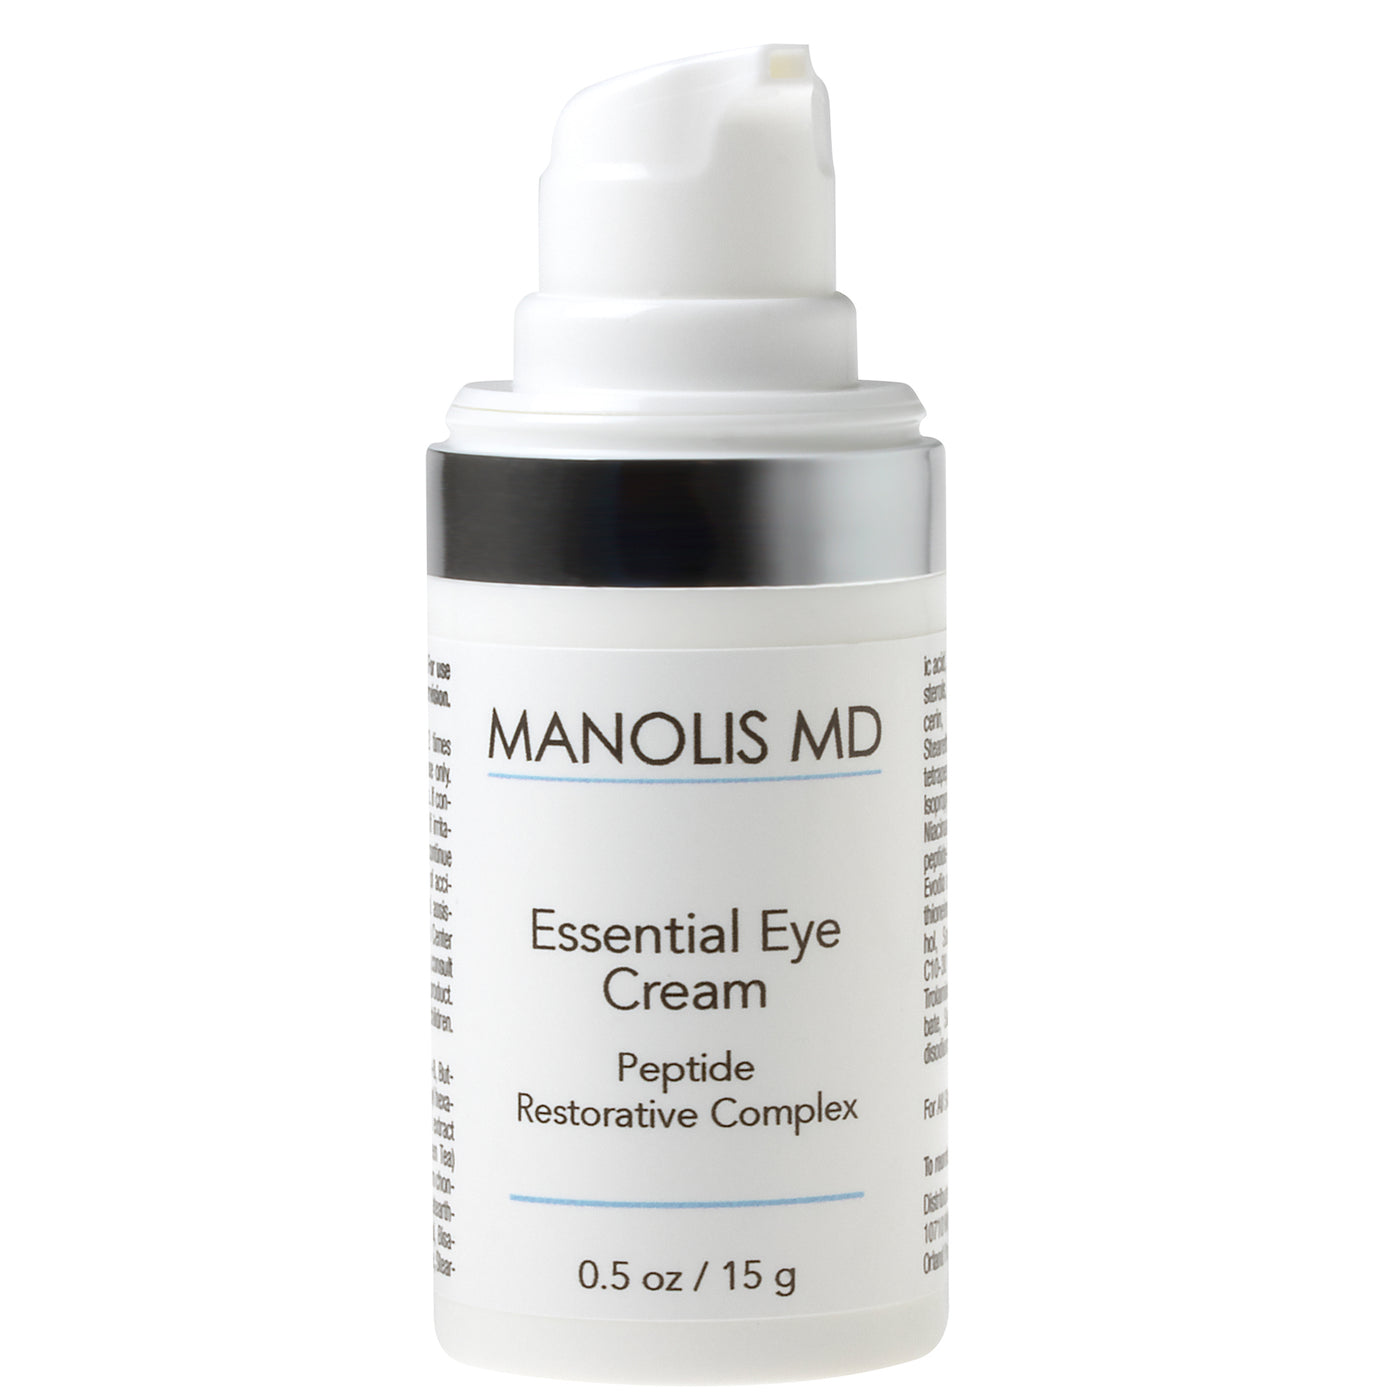 Essential Eye Cream is a potent combination of ingredients designed to target the specific needs of the eye area. This eye cream contains a form of Vitamin C clinically demonstrated to improve skin appearance.